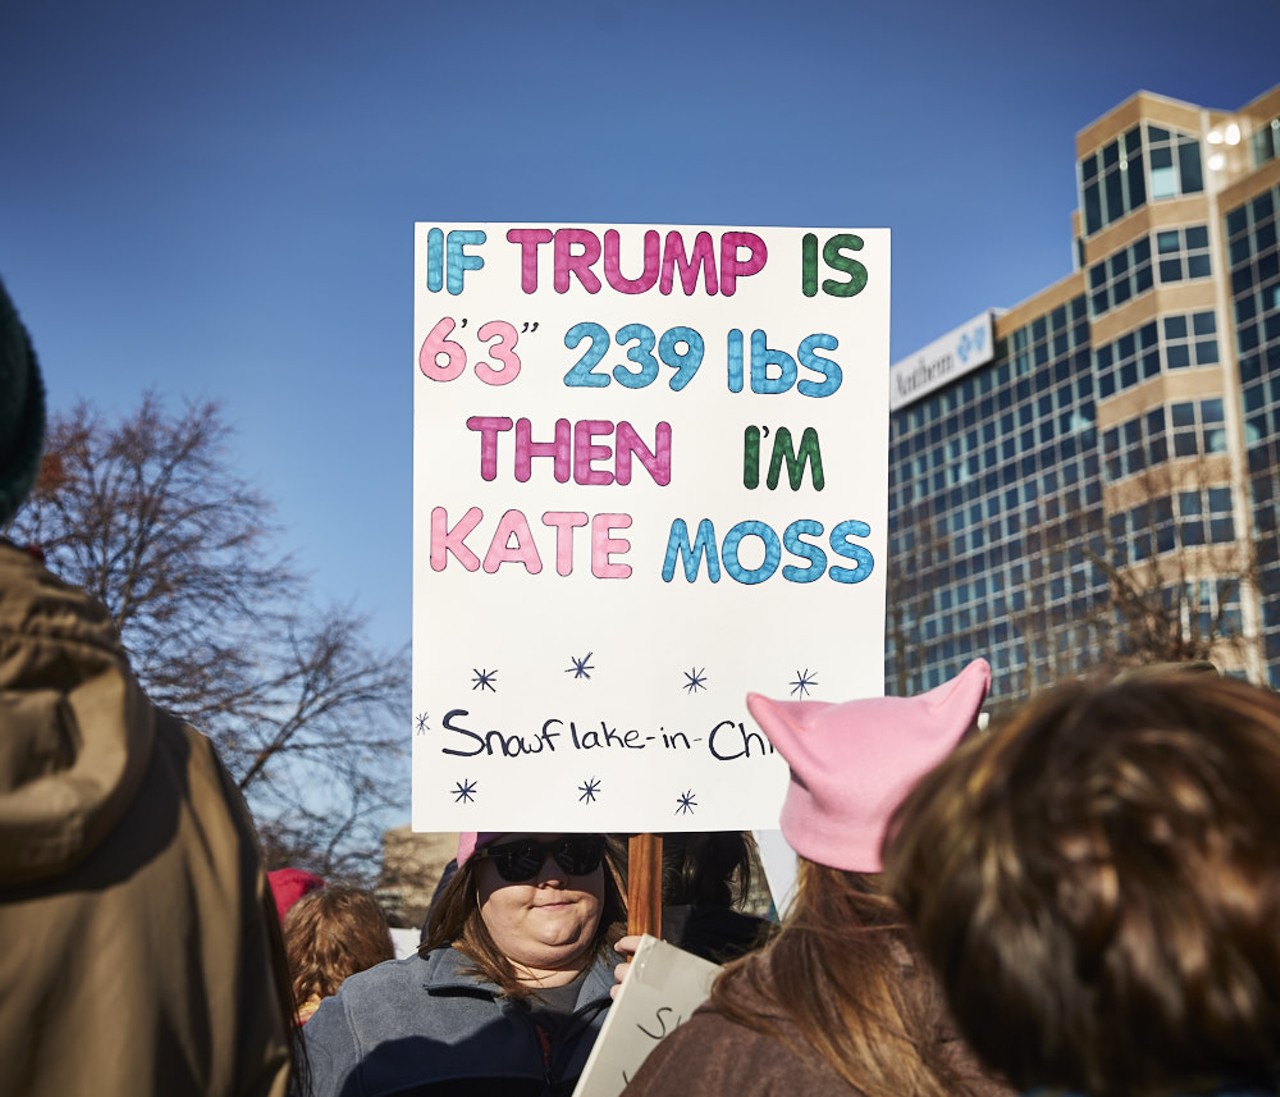 Second annual Women's March in downtown St. Louis on January 20, 2018.